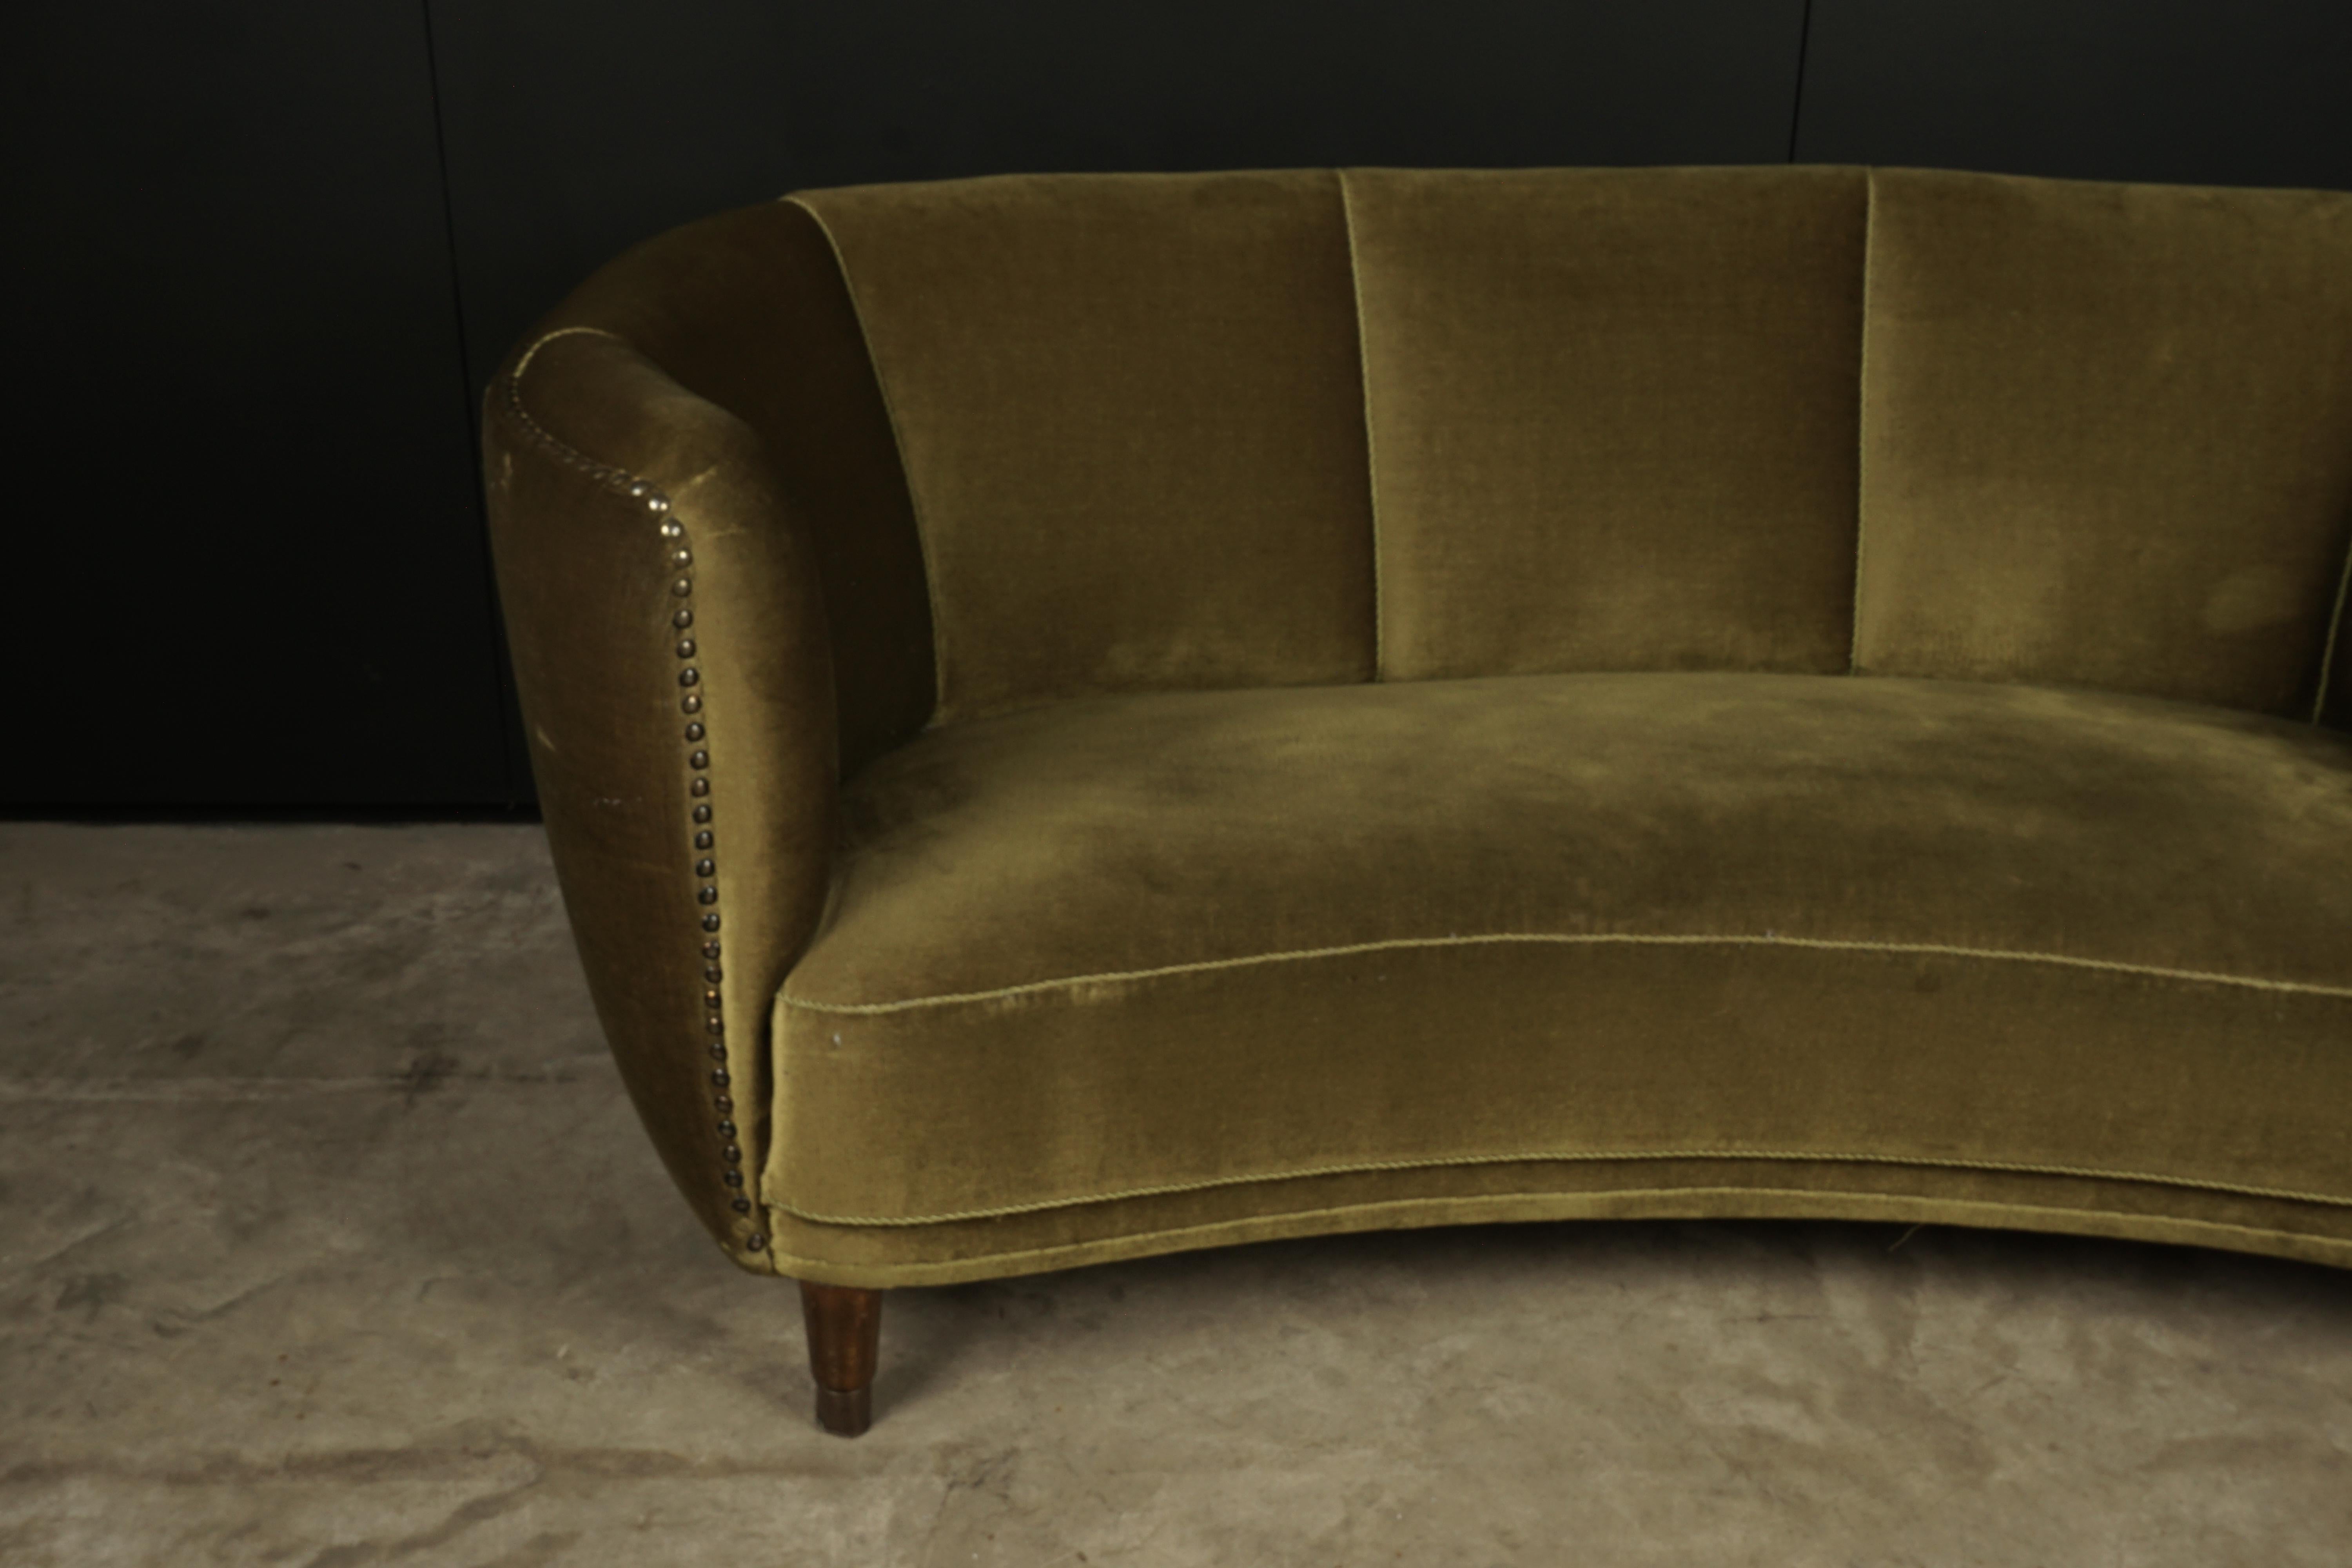 Midcentury curved velour sofa from Denmark, 1950s. Green velour upholstery with legs of stained beech.